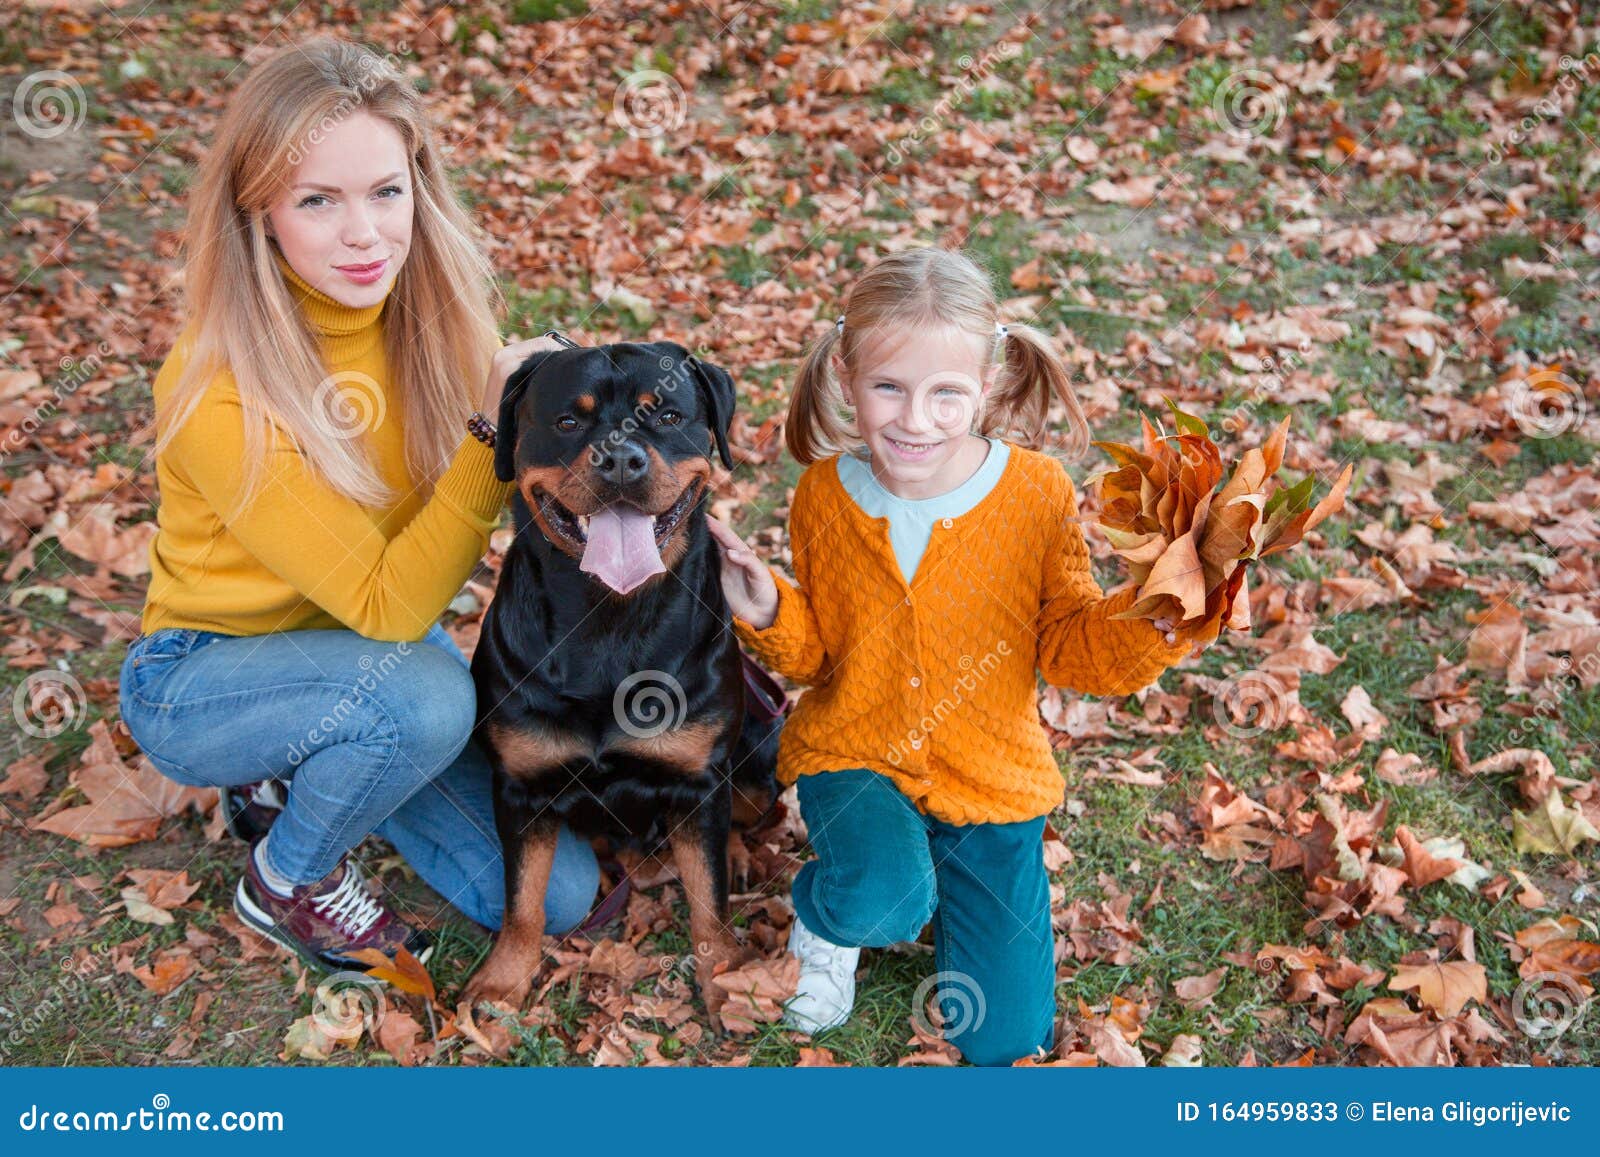 Beautiful Happy Family is Having Fun with Rottweiler Dog. Blonde Adorable  Mother and Daughter Embracing Their Dog. Stock Image - Image of enjoyment,  child: 164959833